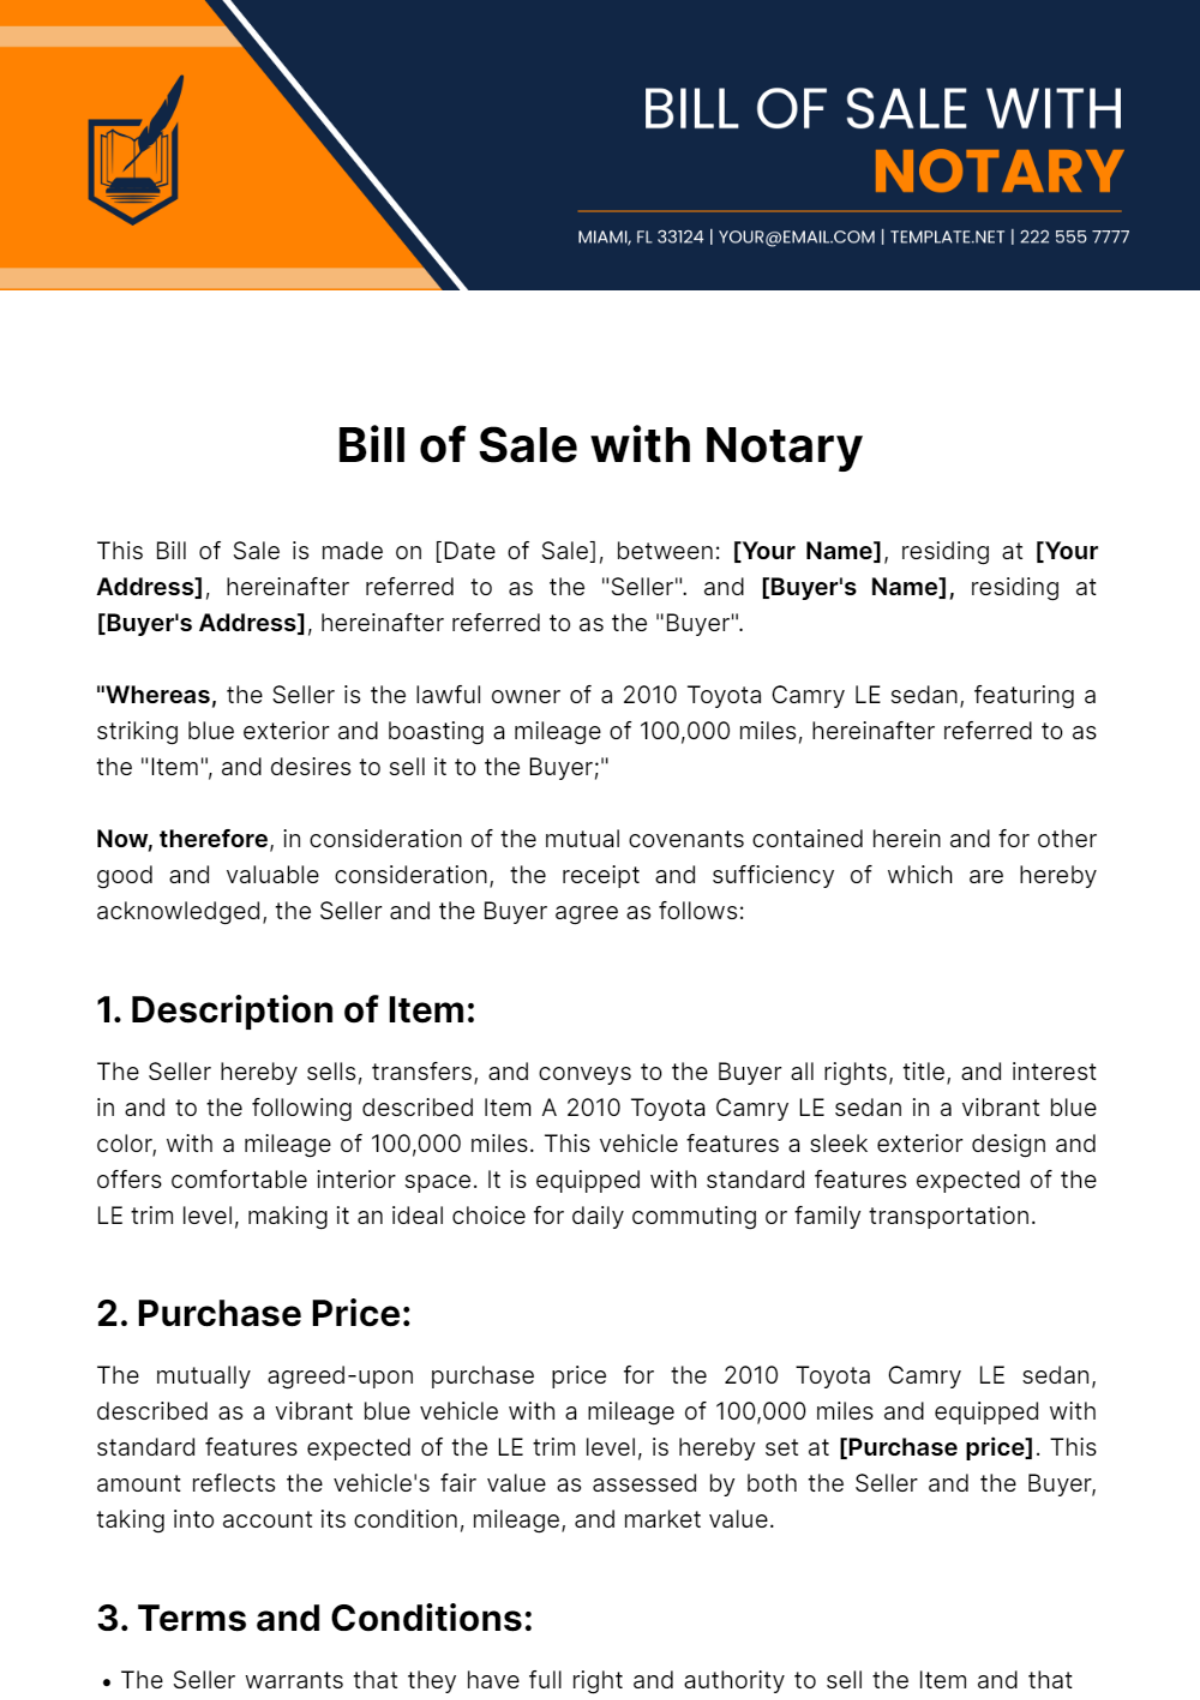 Free Bill of Sale with Notary Template